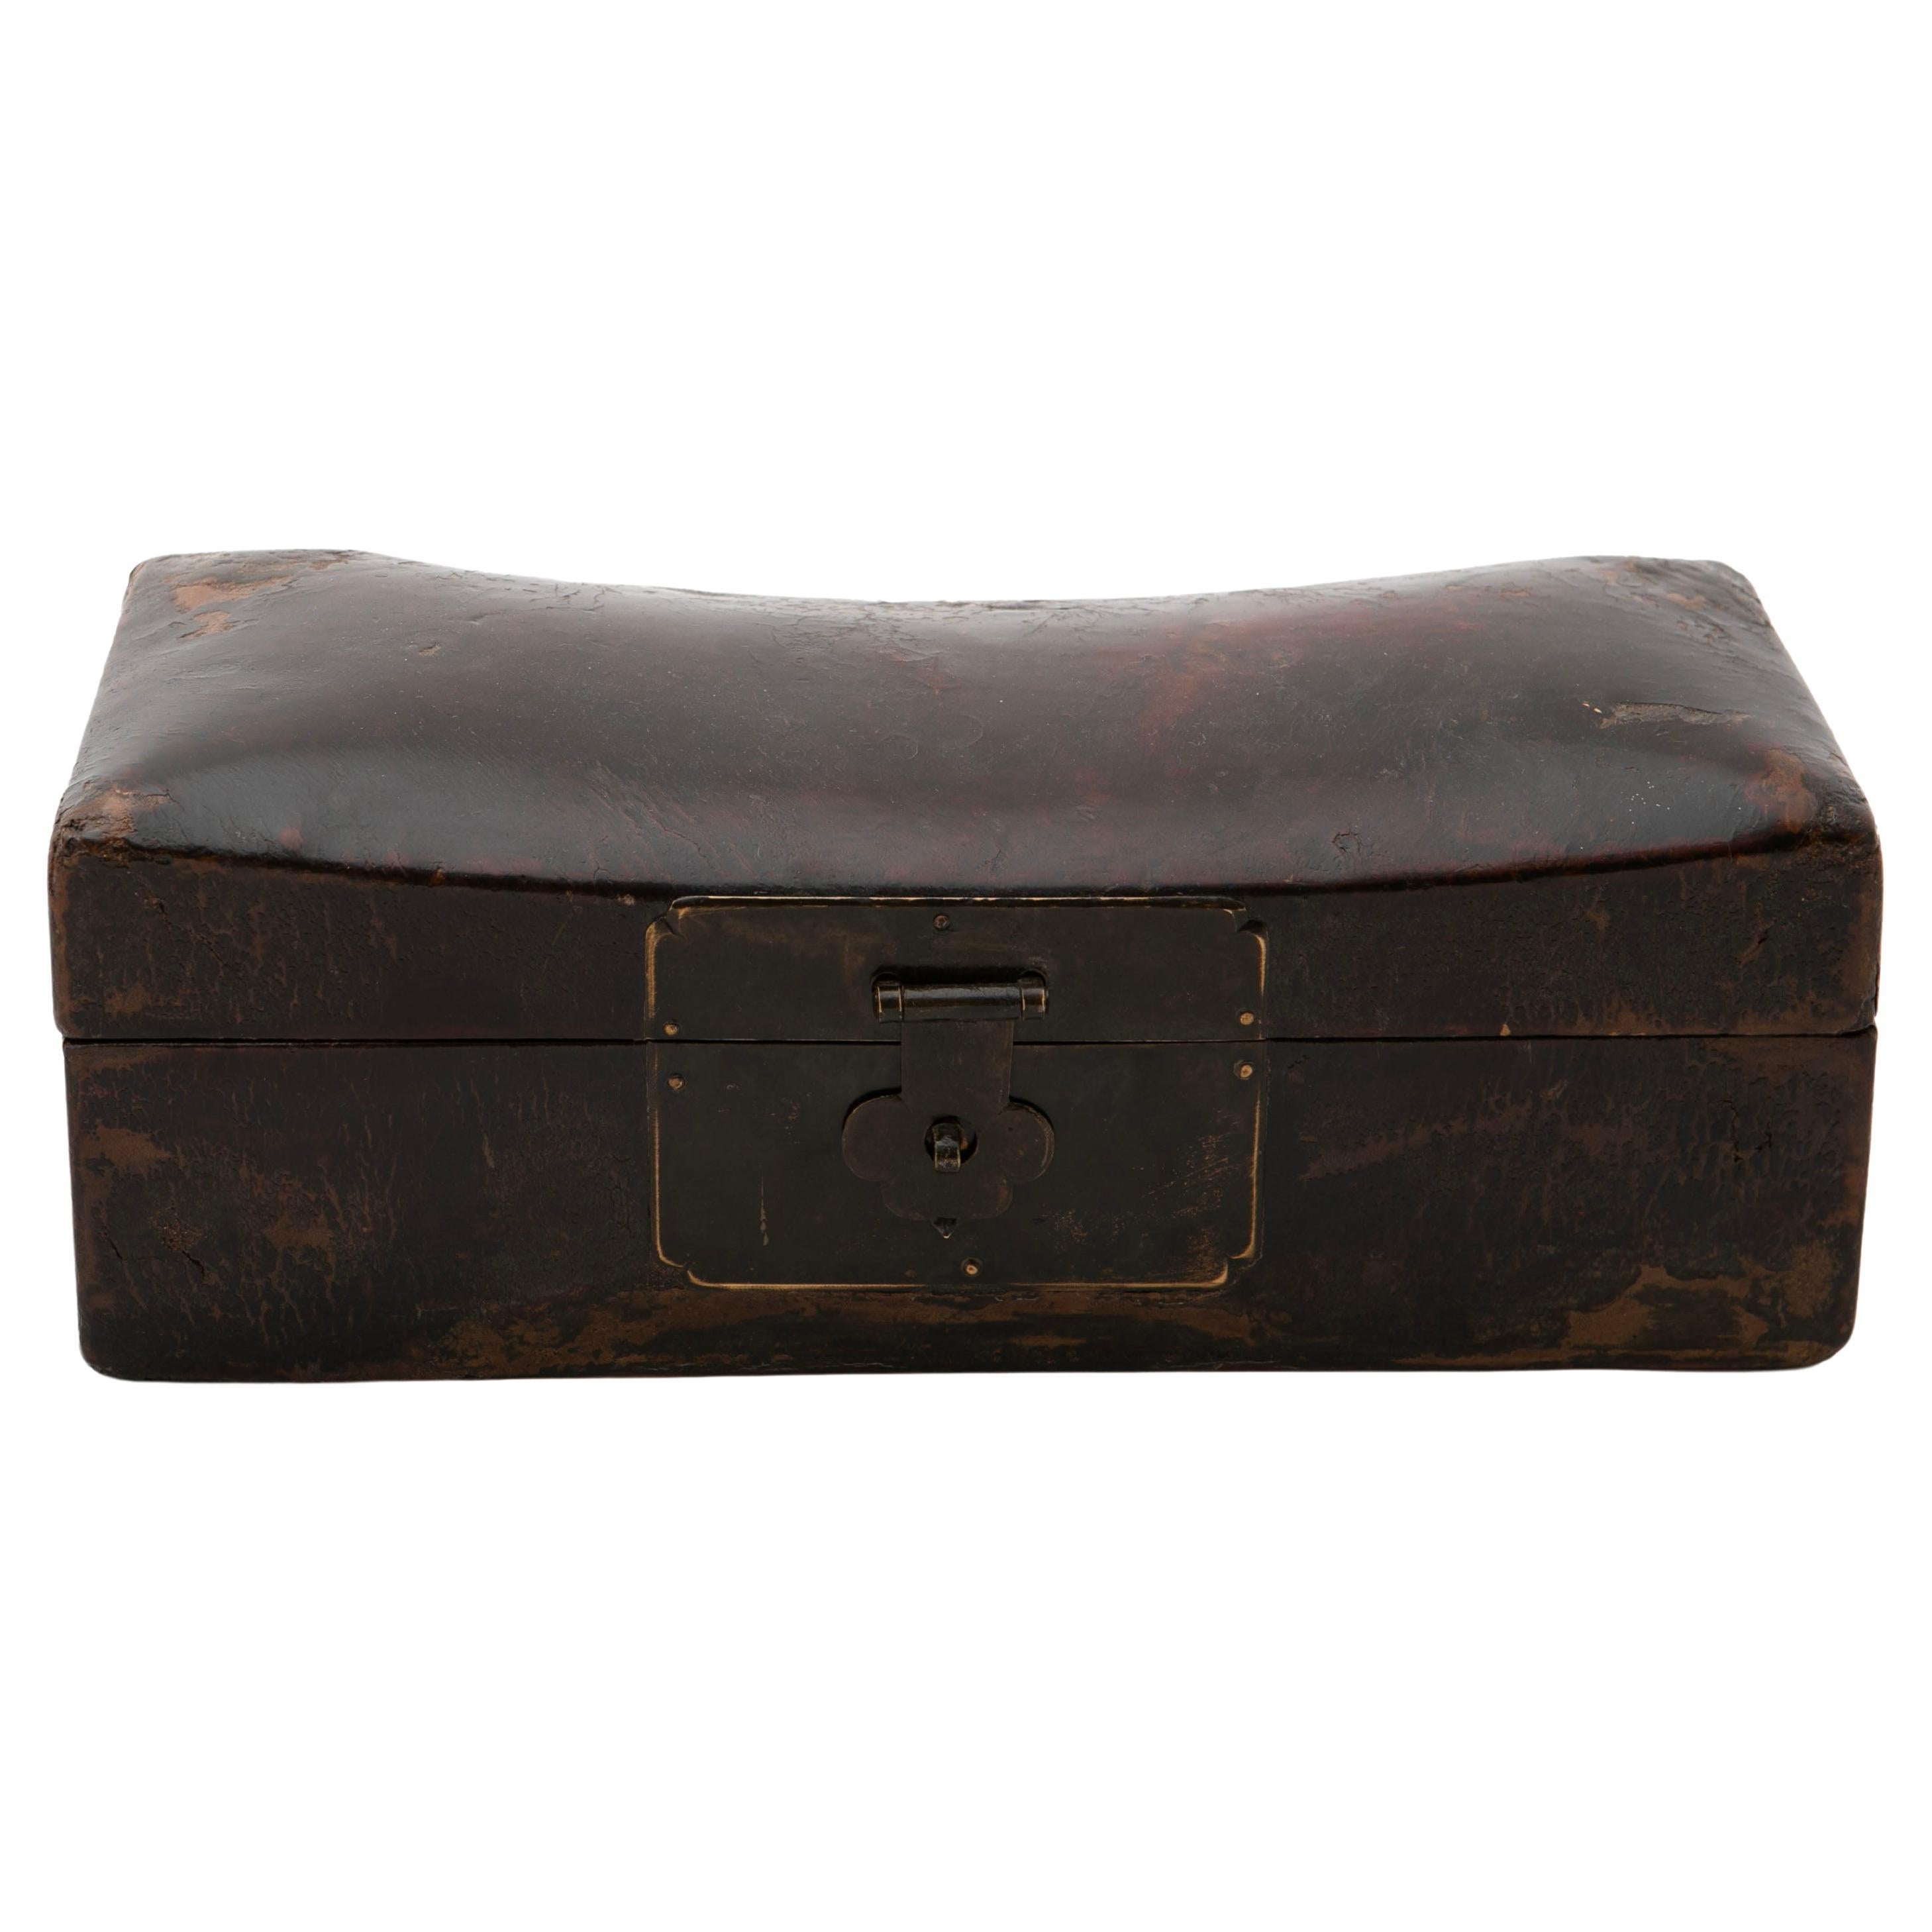 Chinese Qing 'Pillow' Leather box